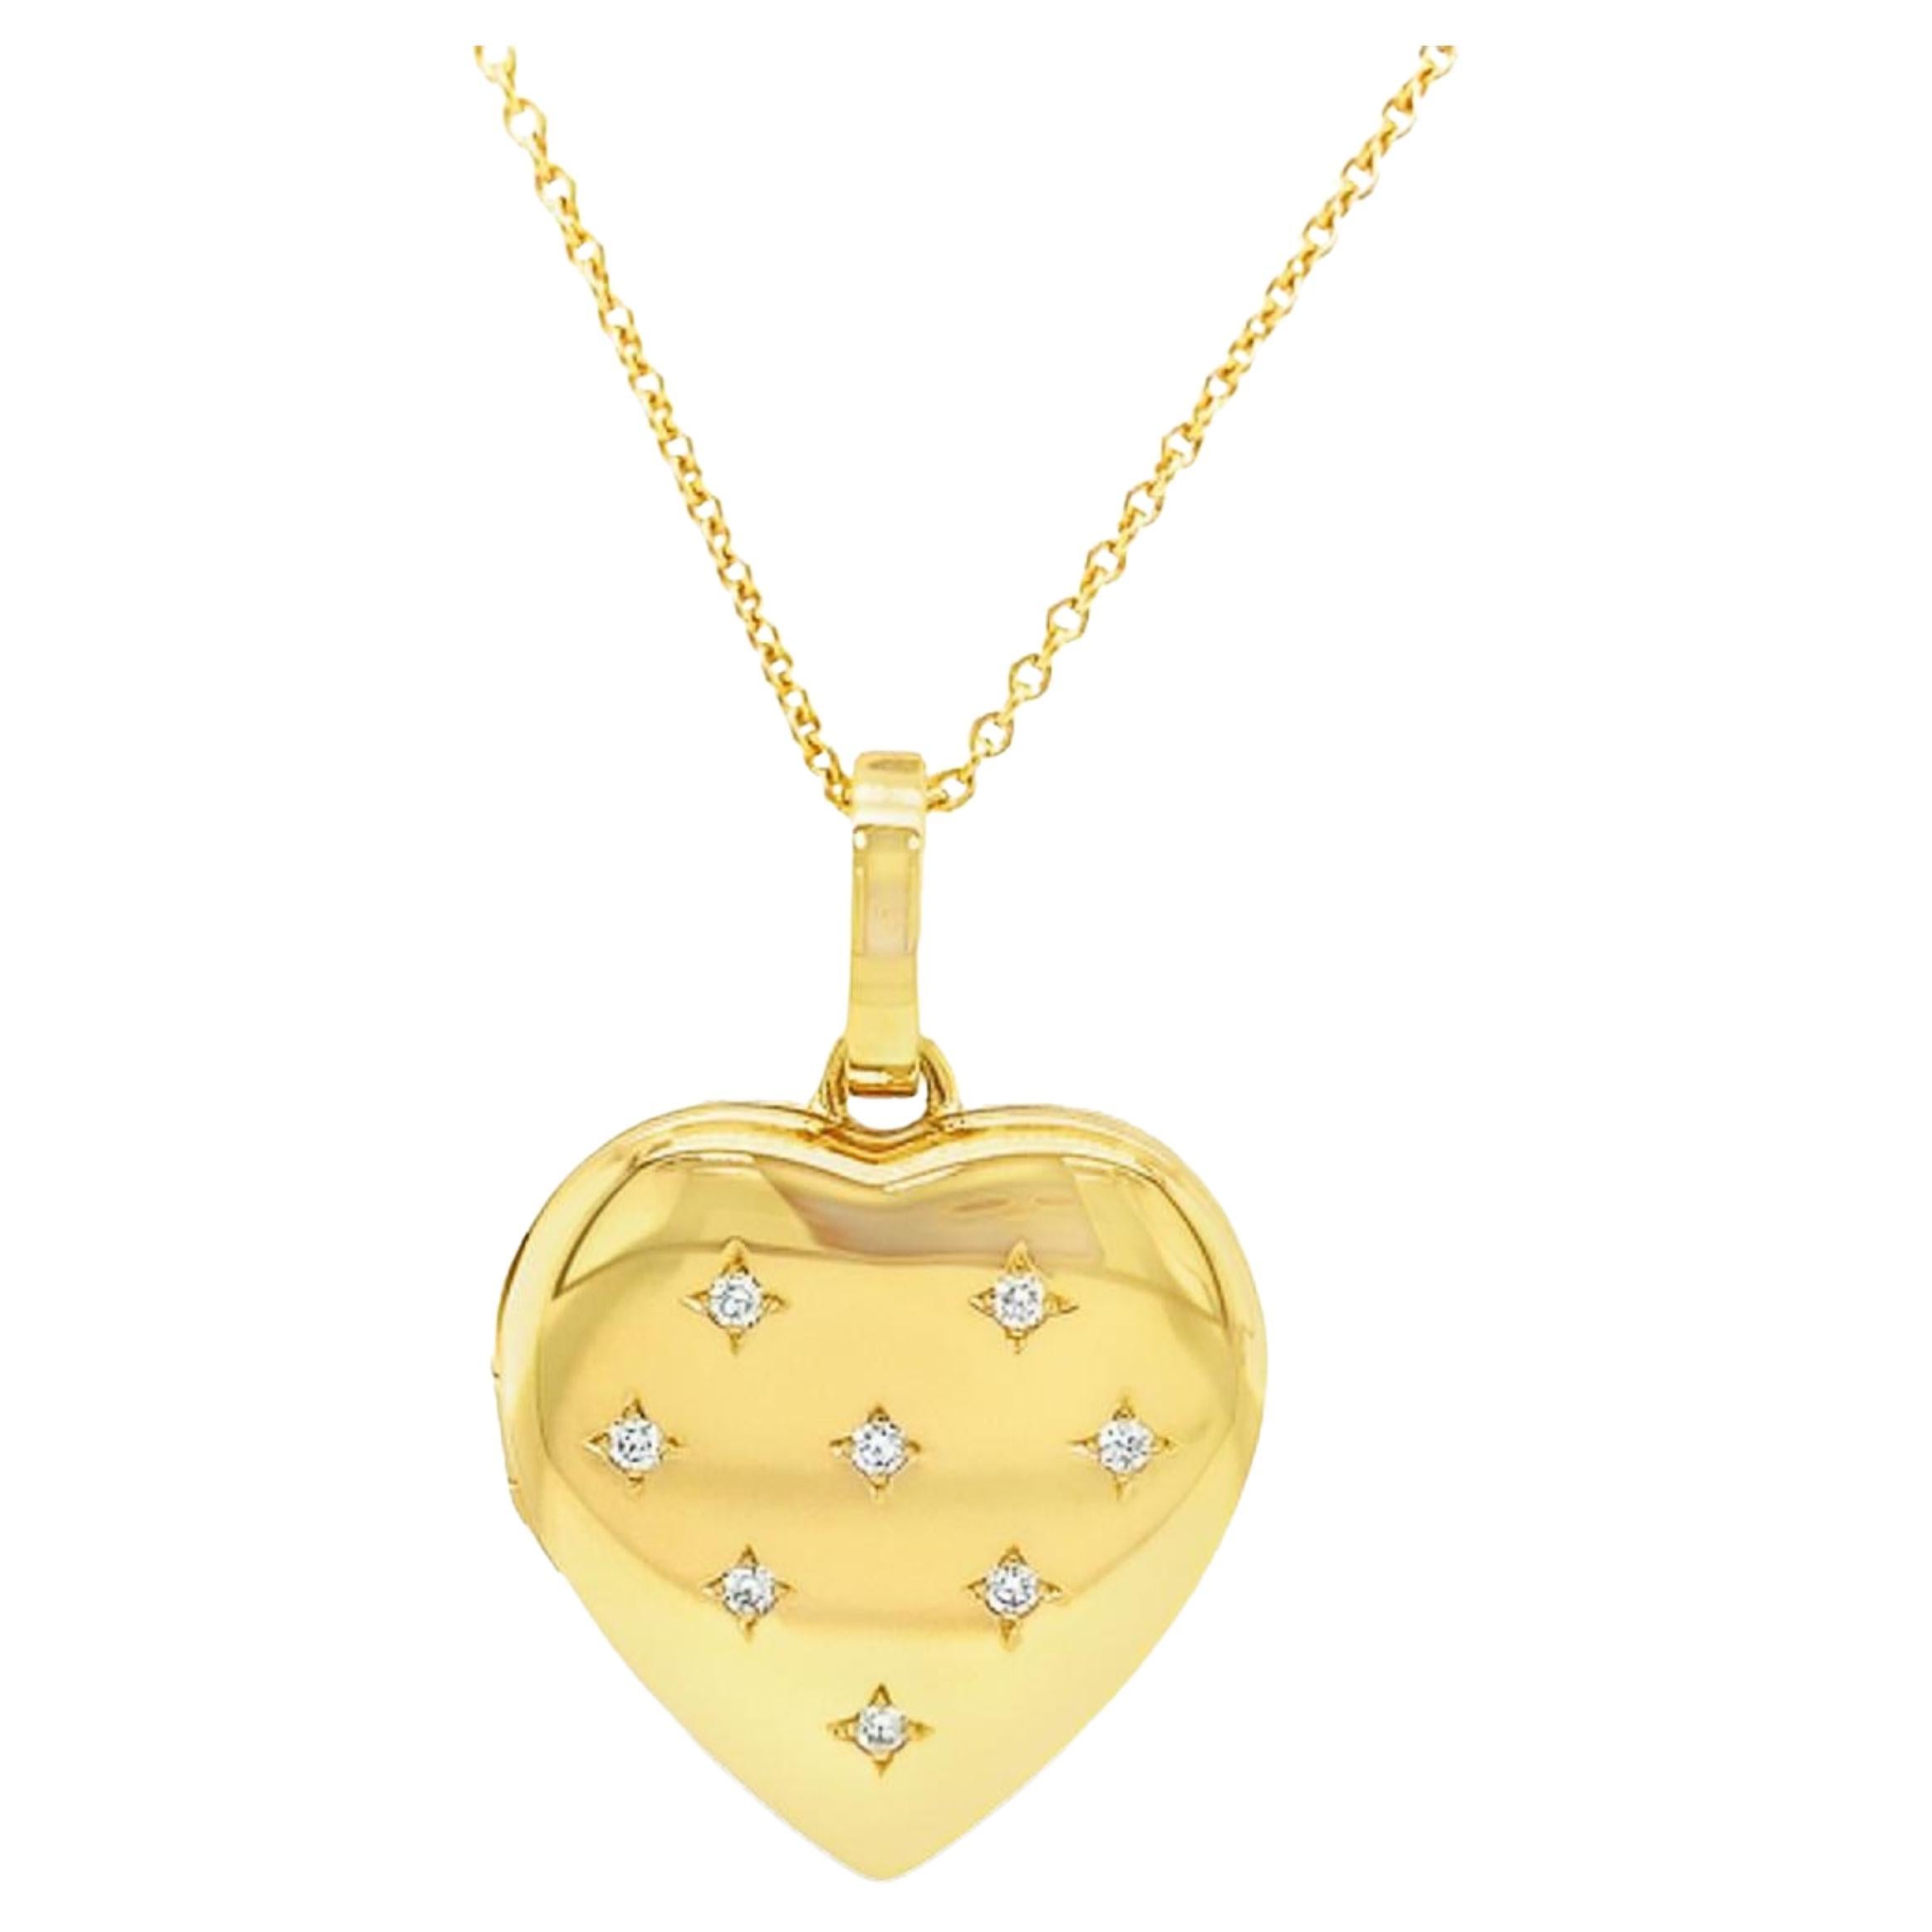 Heart Shaped Locket Pendant by Victor Mayer, 18k Yellow Gold, 8 Diamonds 0.16ct For Sale